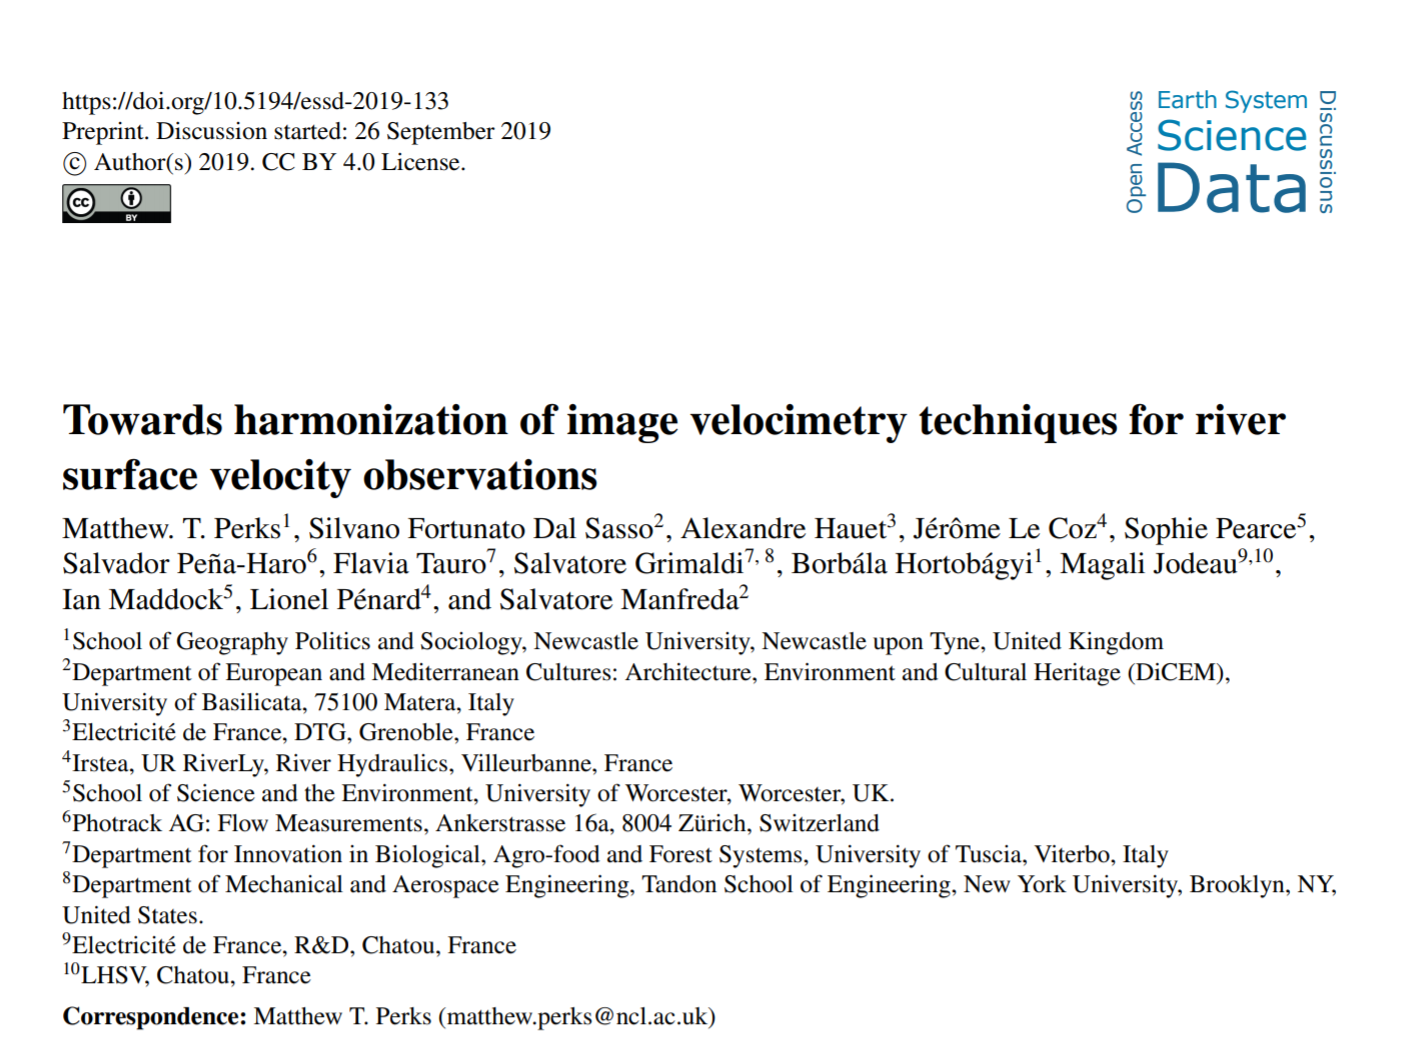 Towards harmonization of image velocimetry techniques for river surface velocity observations